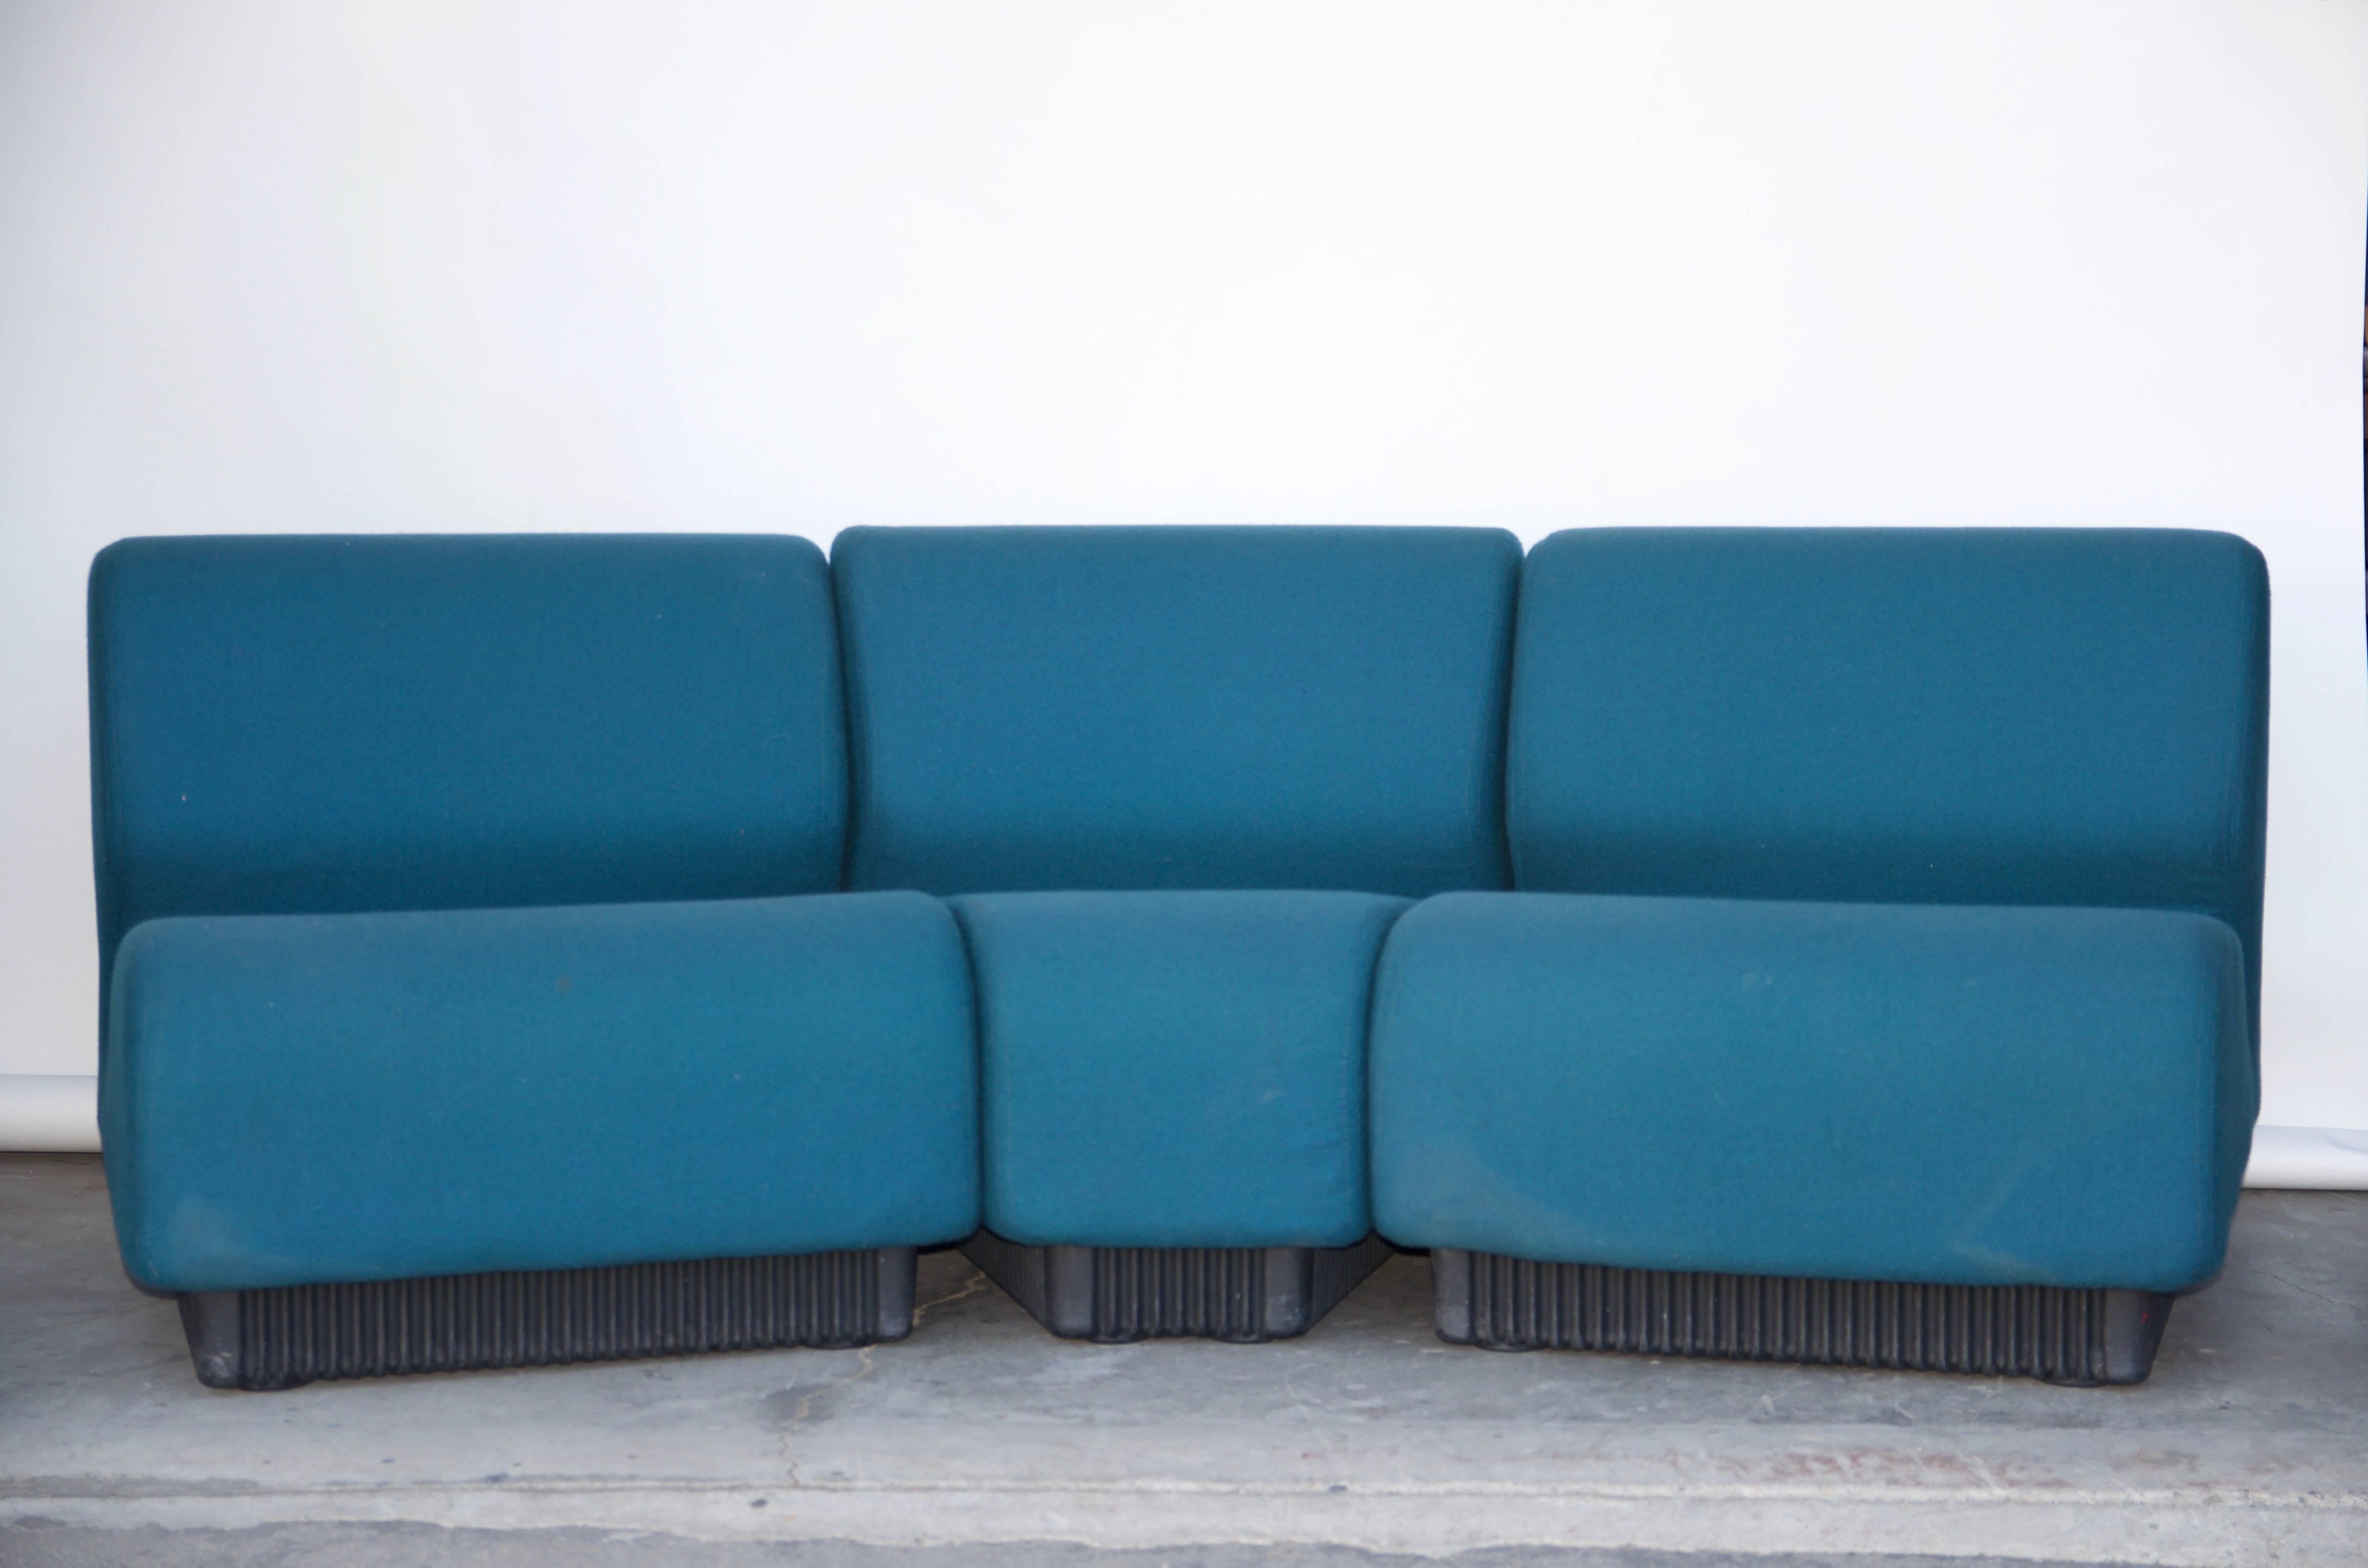 Modular Settee by Don Chadwick for Herman Miller 1